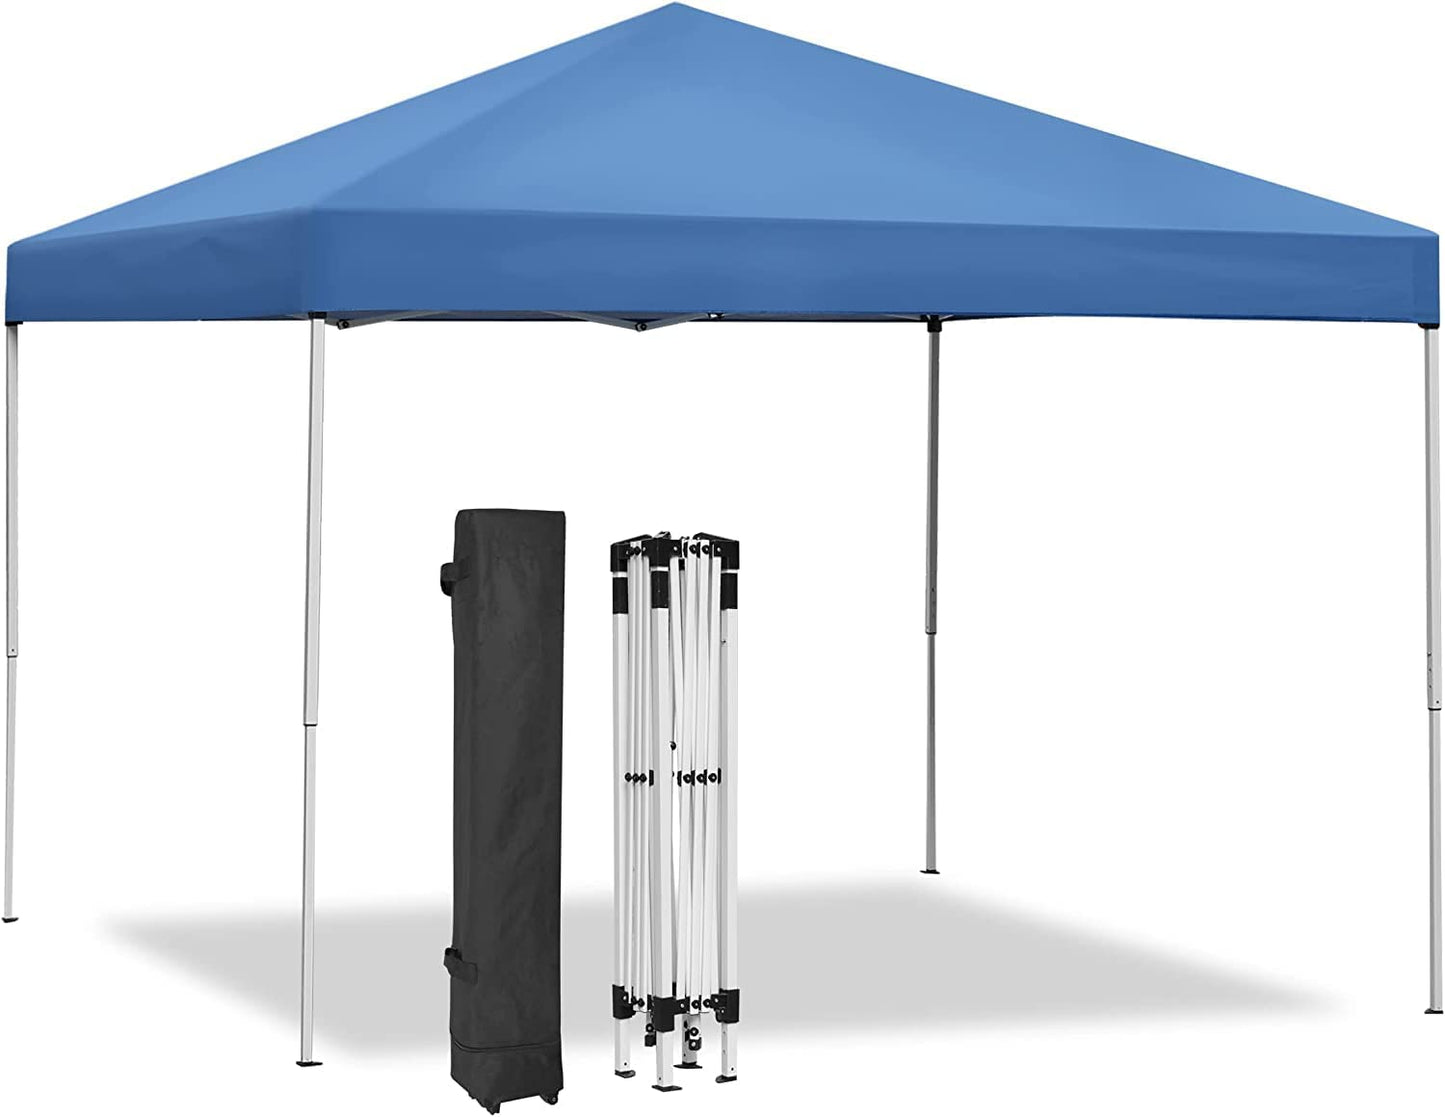 10x10 Pop Up Canopy Tent Easy Set-up Outdoor Patio Canopy Adjustable Straight Leg Heights Instant Shelter with Wheeled Bag, Ropes